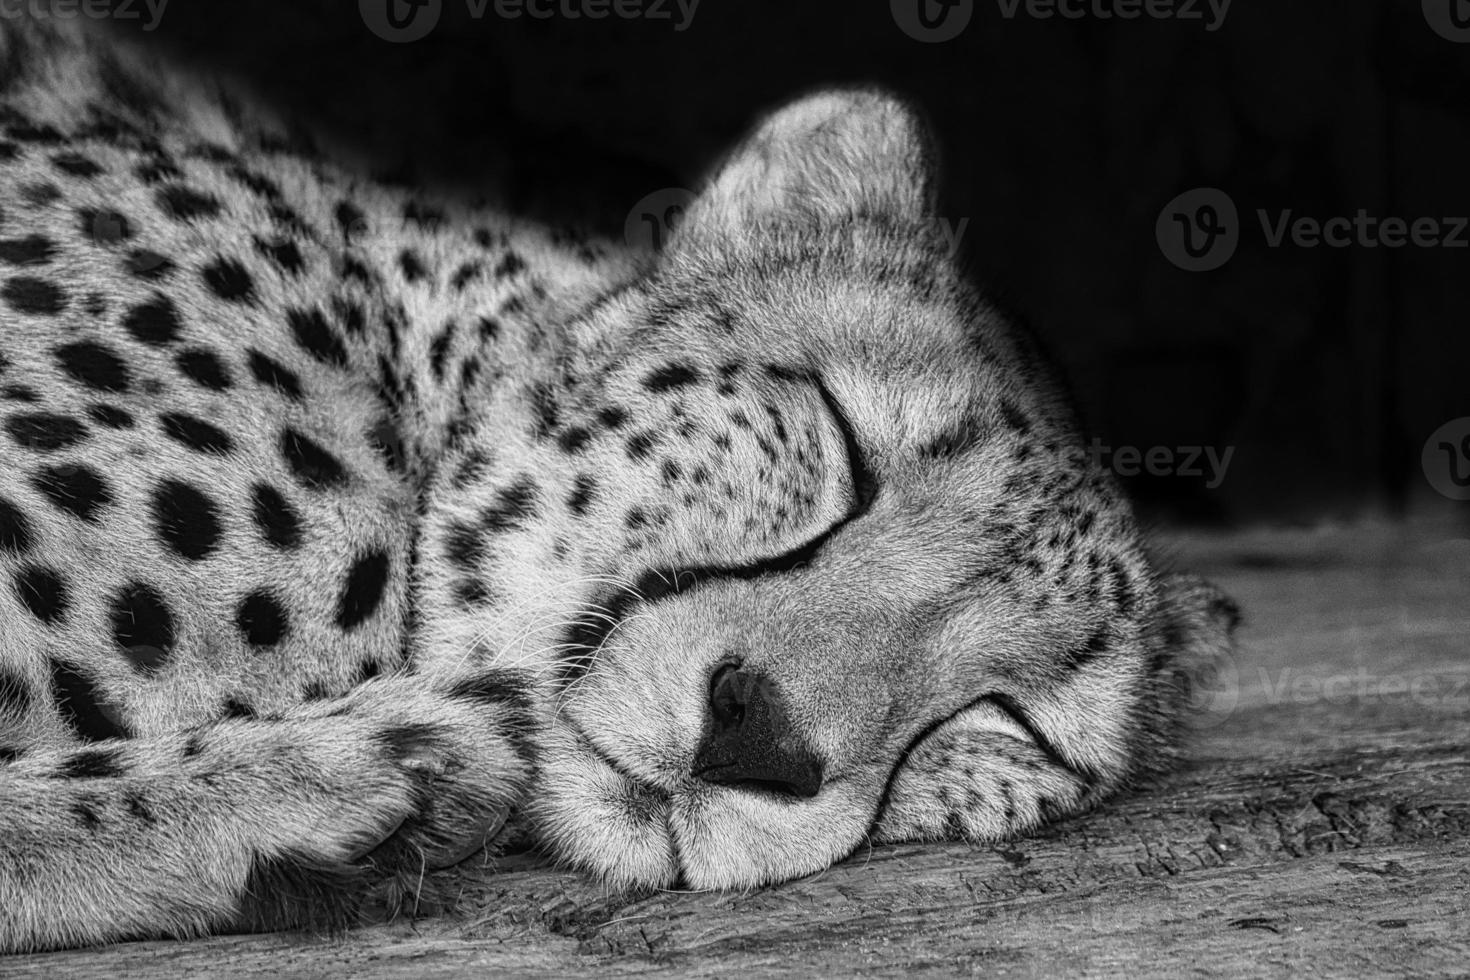 Cheetah in black white lying behind grass. Spotted fur. The big cat is a predator photo